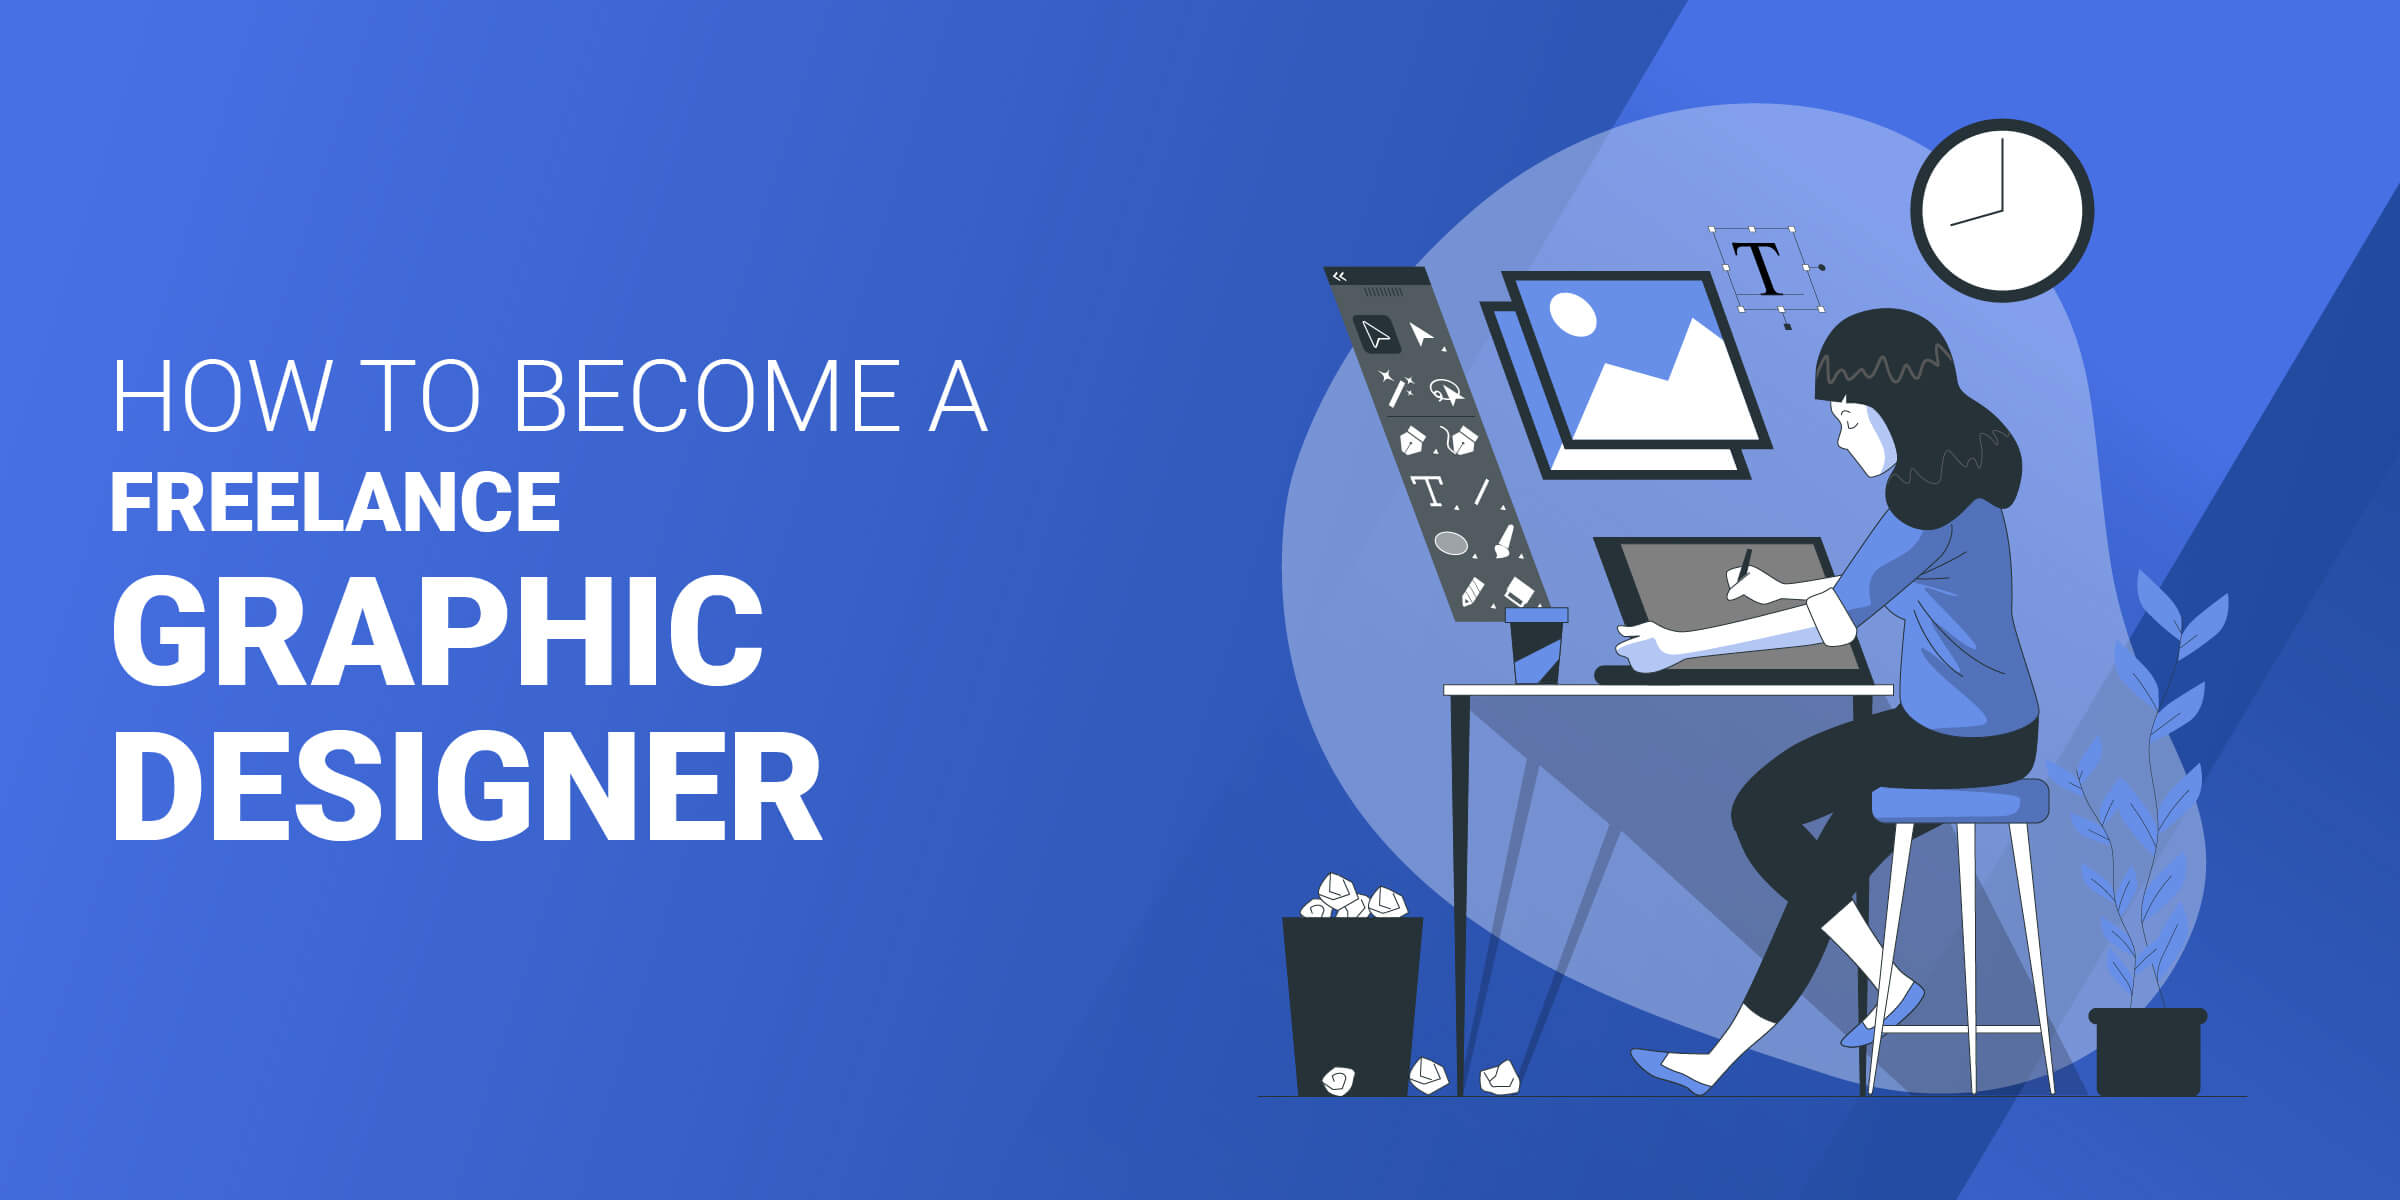 How to Become Freelance Graphic Designer